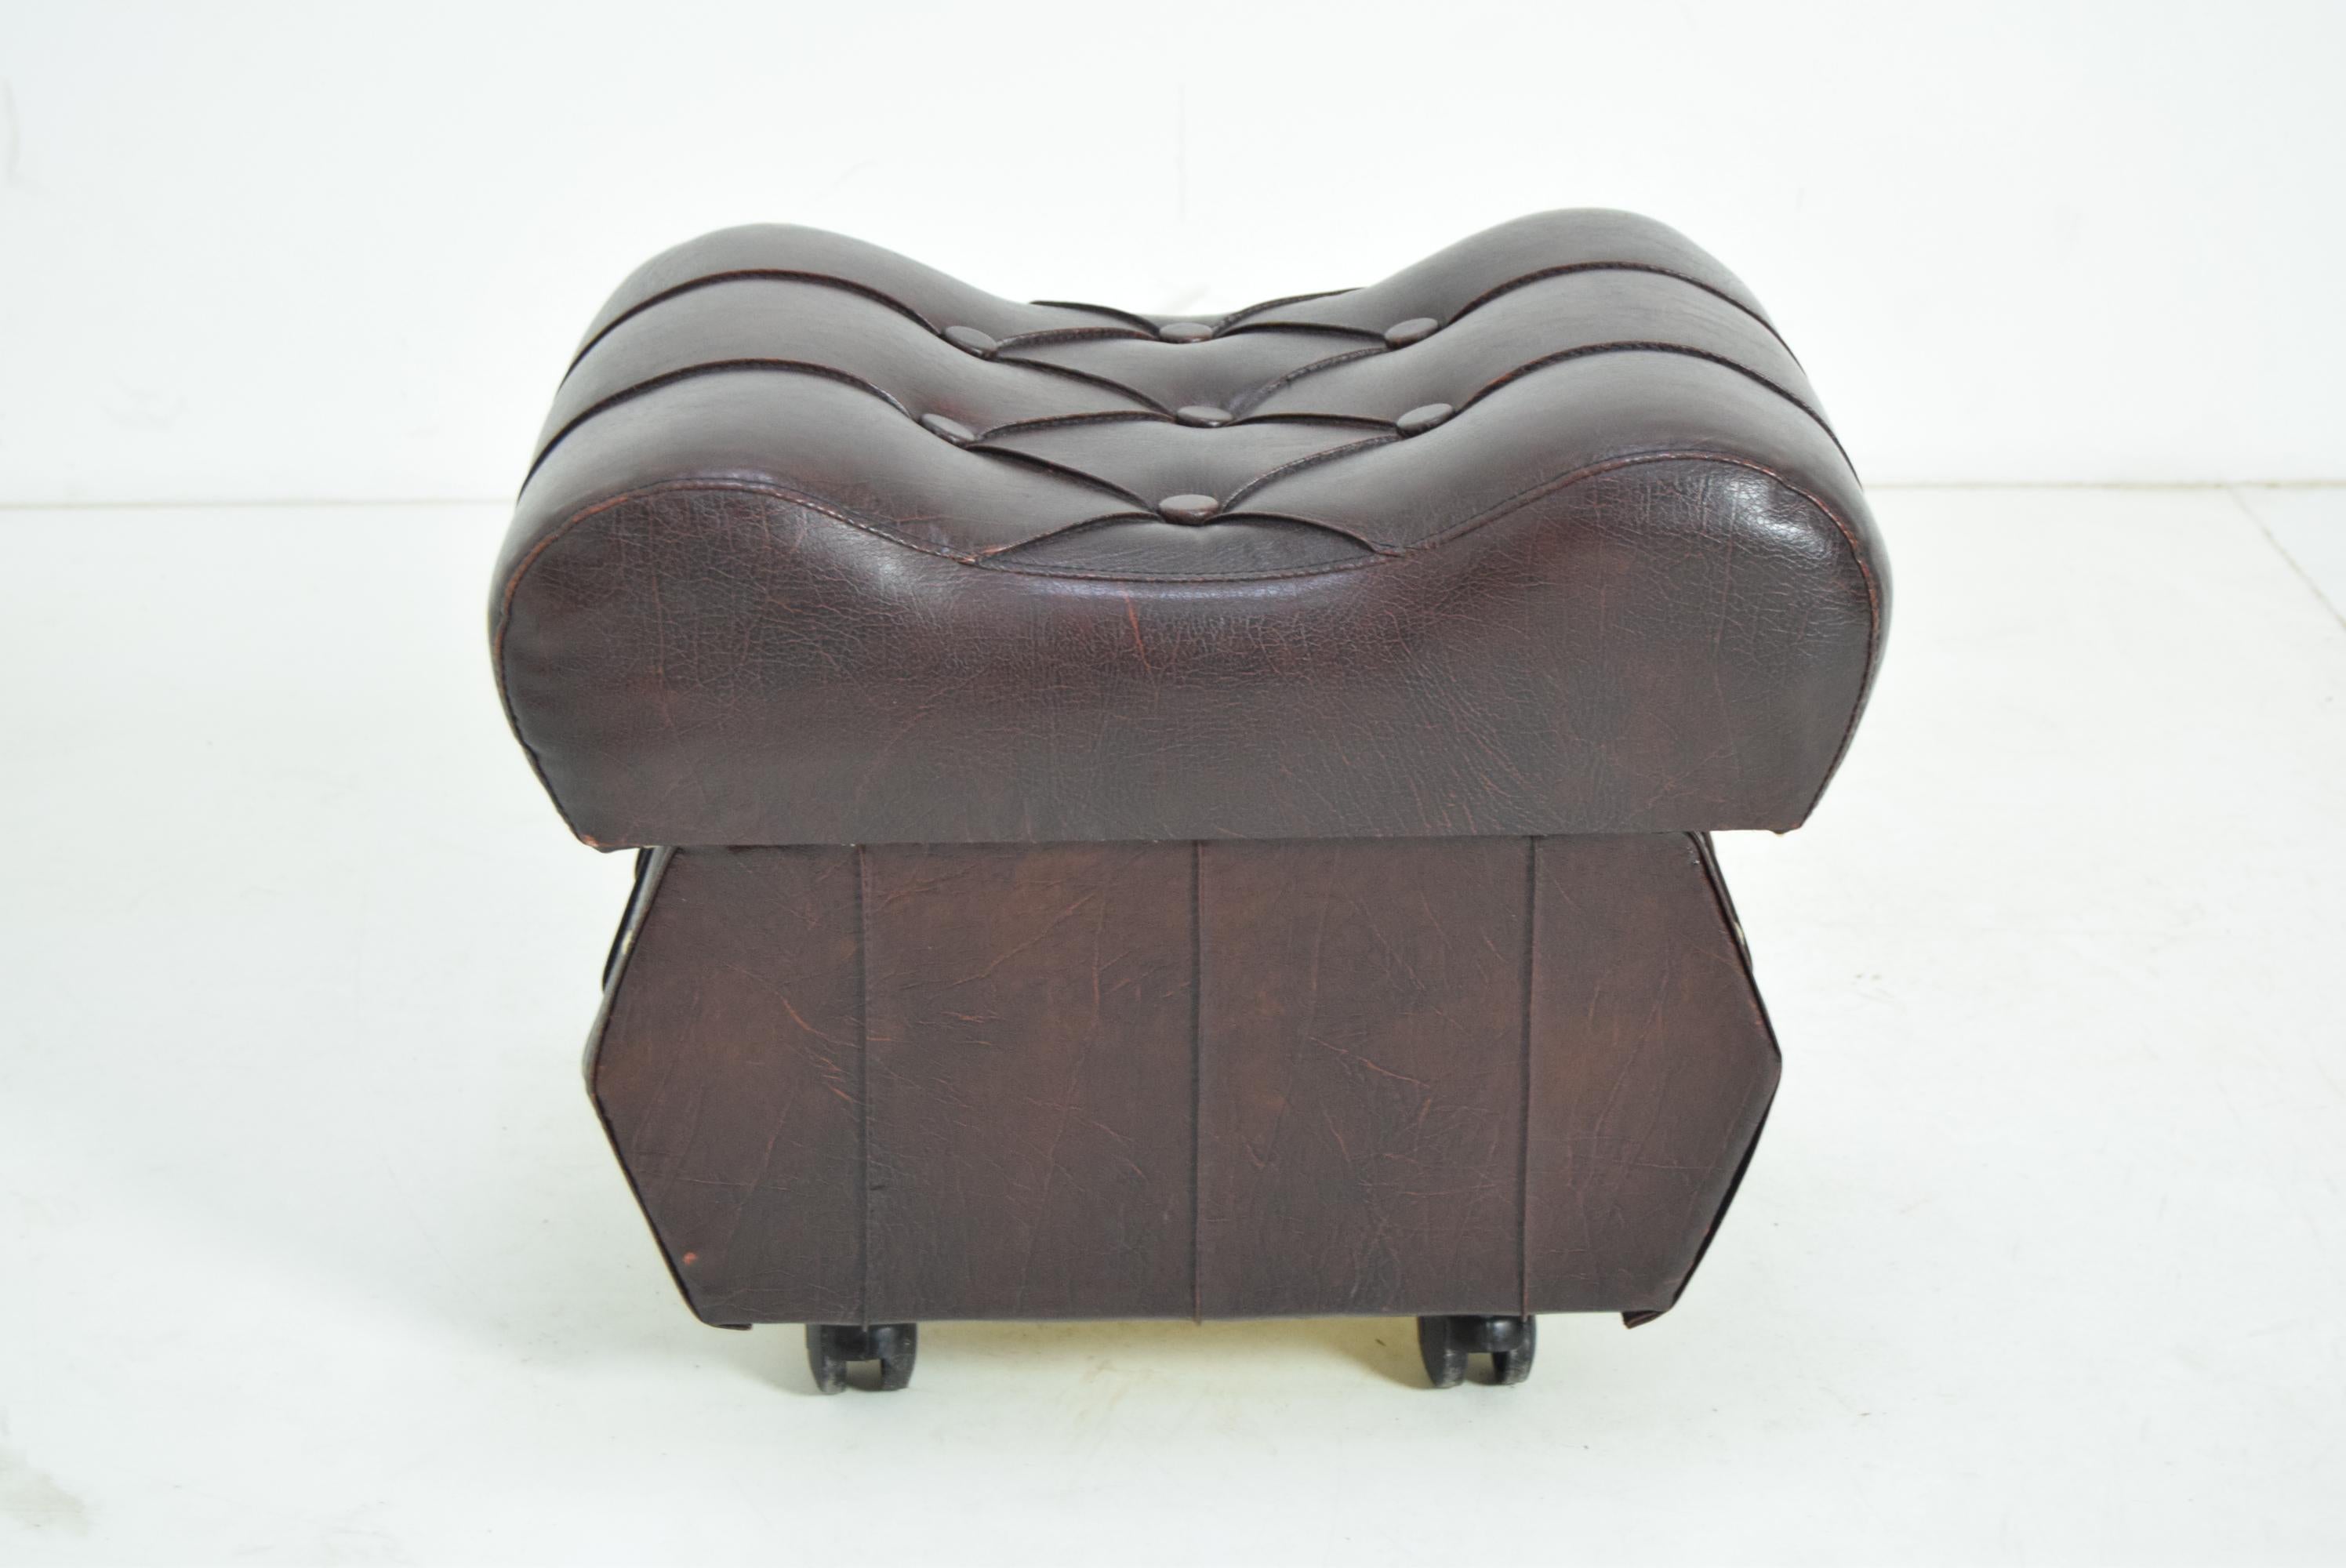 Made in Czechoslovakia
Made of Leatherette
Original condition.